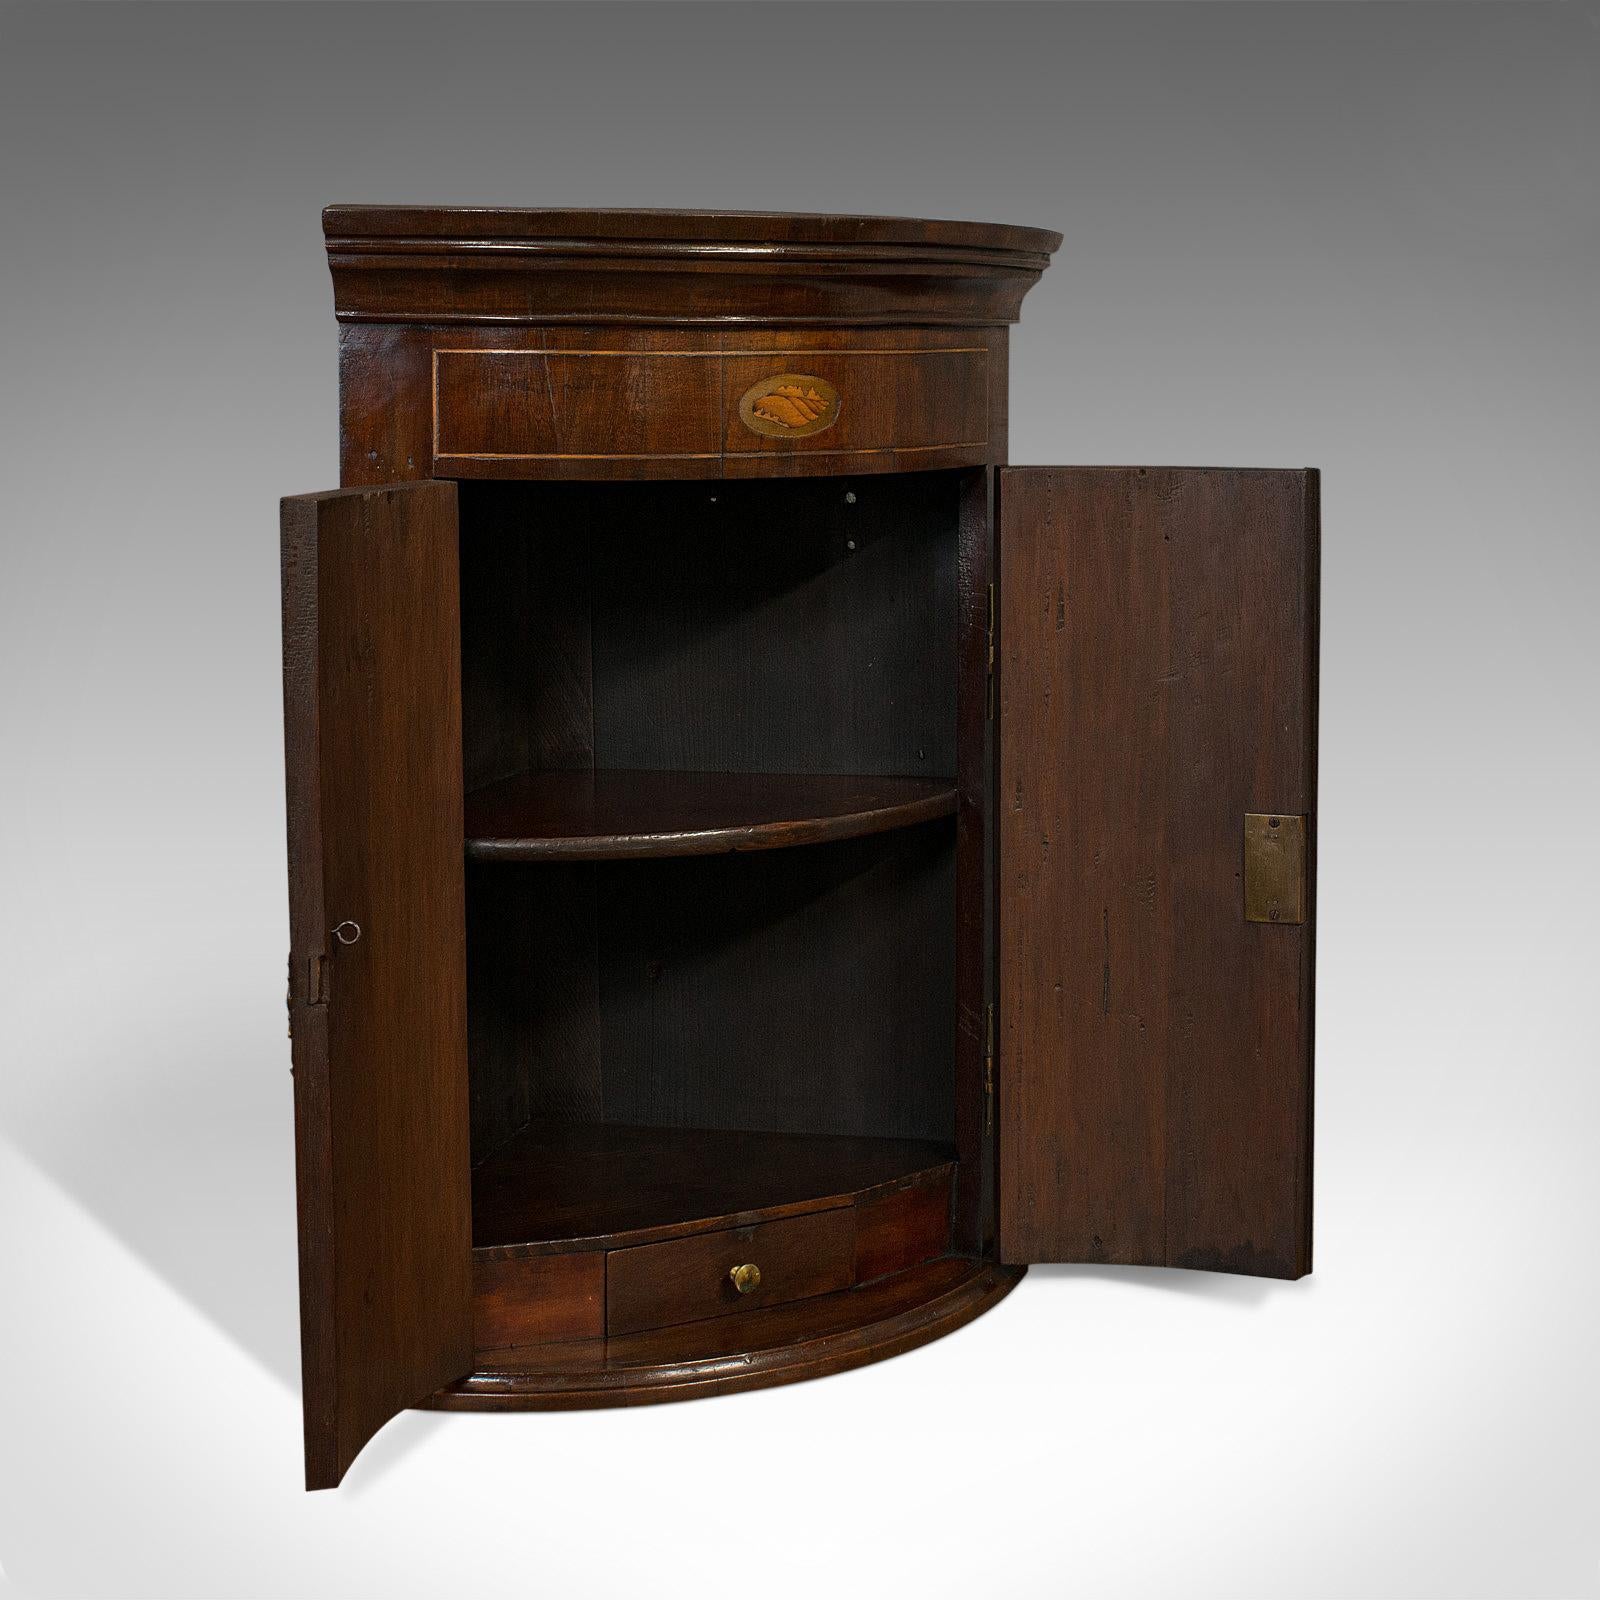 This is a petite antique corner cabinet. An English, mahogany Georgian revival cupboard, dating to the Victorian period, circa 1880.

Diminutive, yet wonderfully presented
Displays a desirable aged patina
Select mahogany shows fine grain